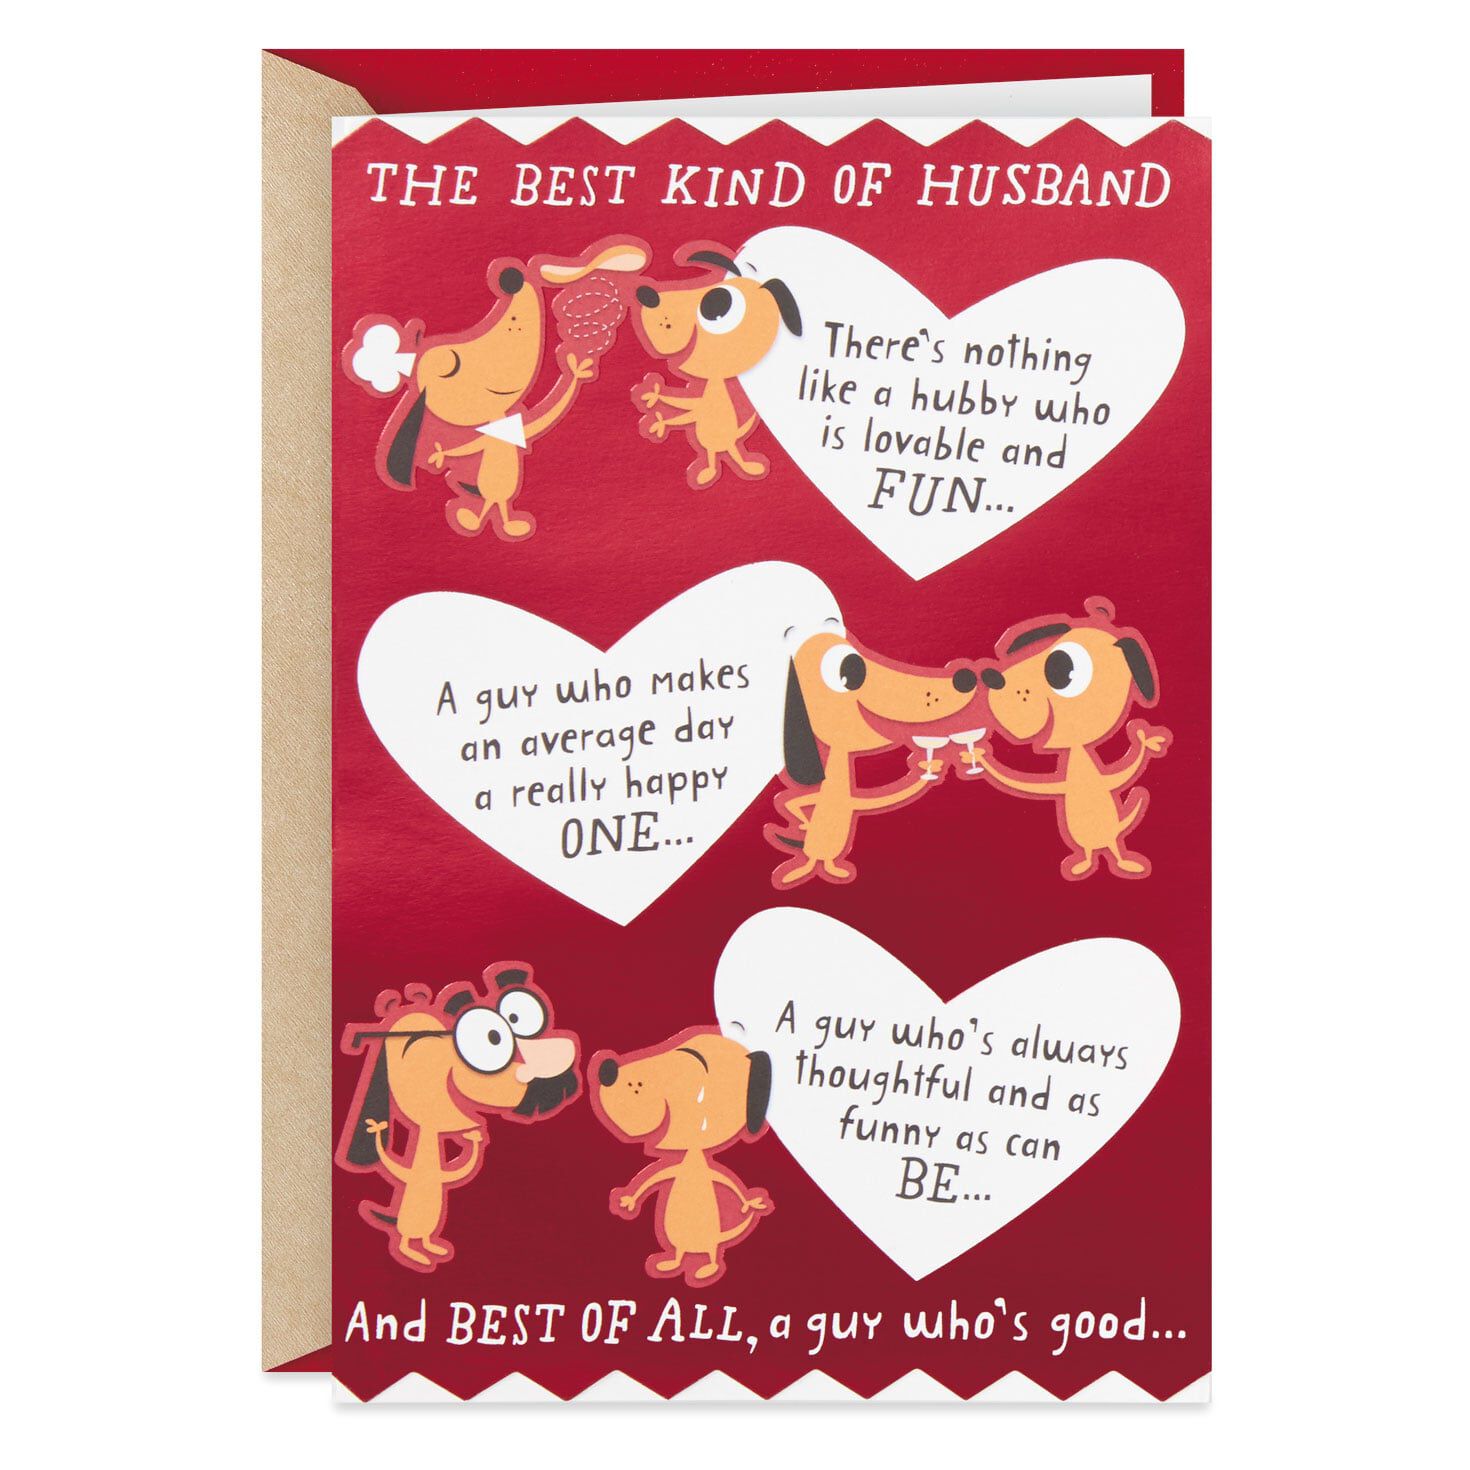 You're the Best Kind of Husband Funny Pop-Up Valentine's Day Card -  Greeting Cards - Hallmark